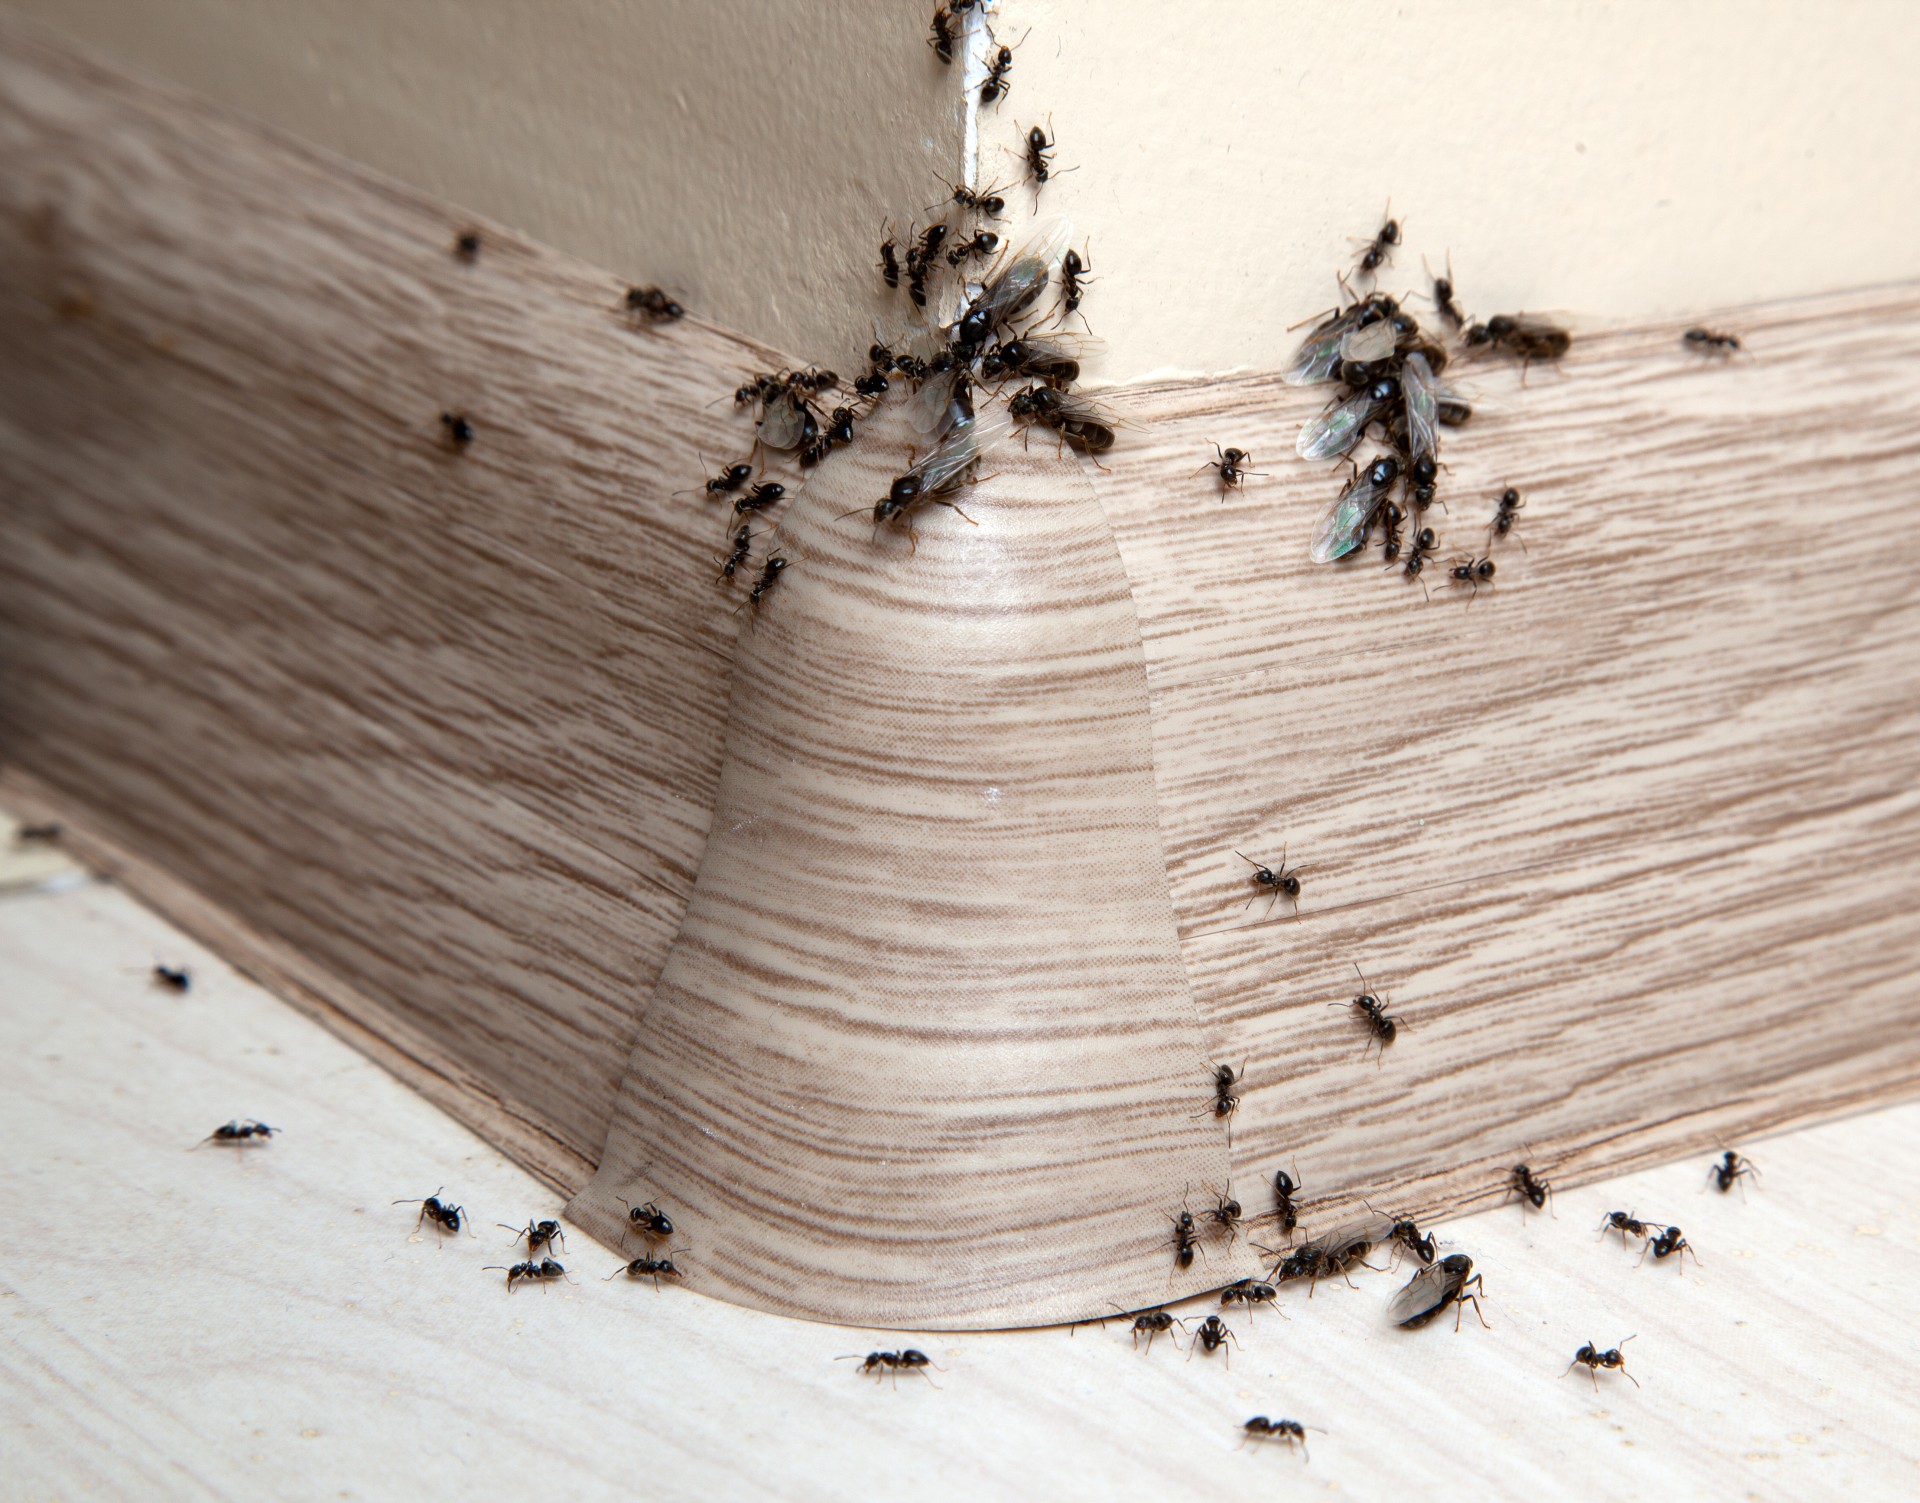 Ant Infestation, Pest Control in Finsbury Park, Manor House, N4. Call Now 020 8166 9746